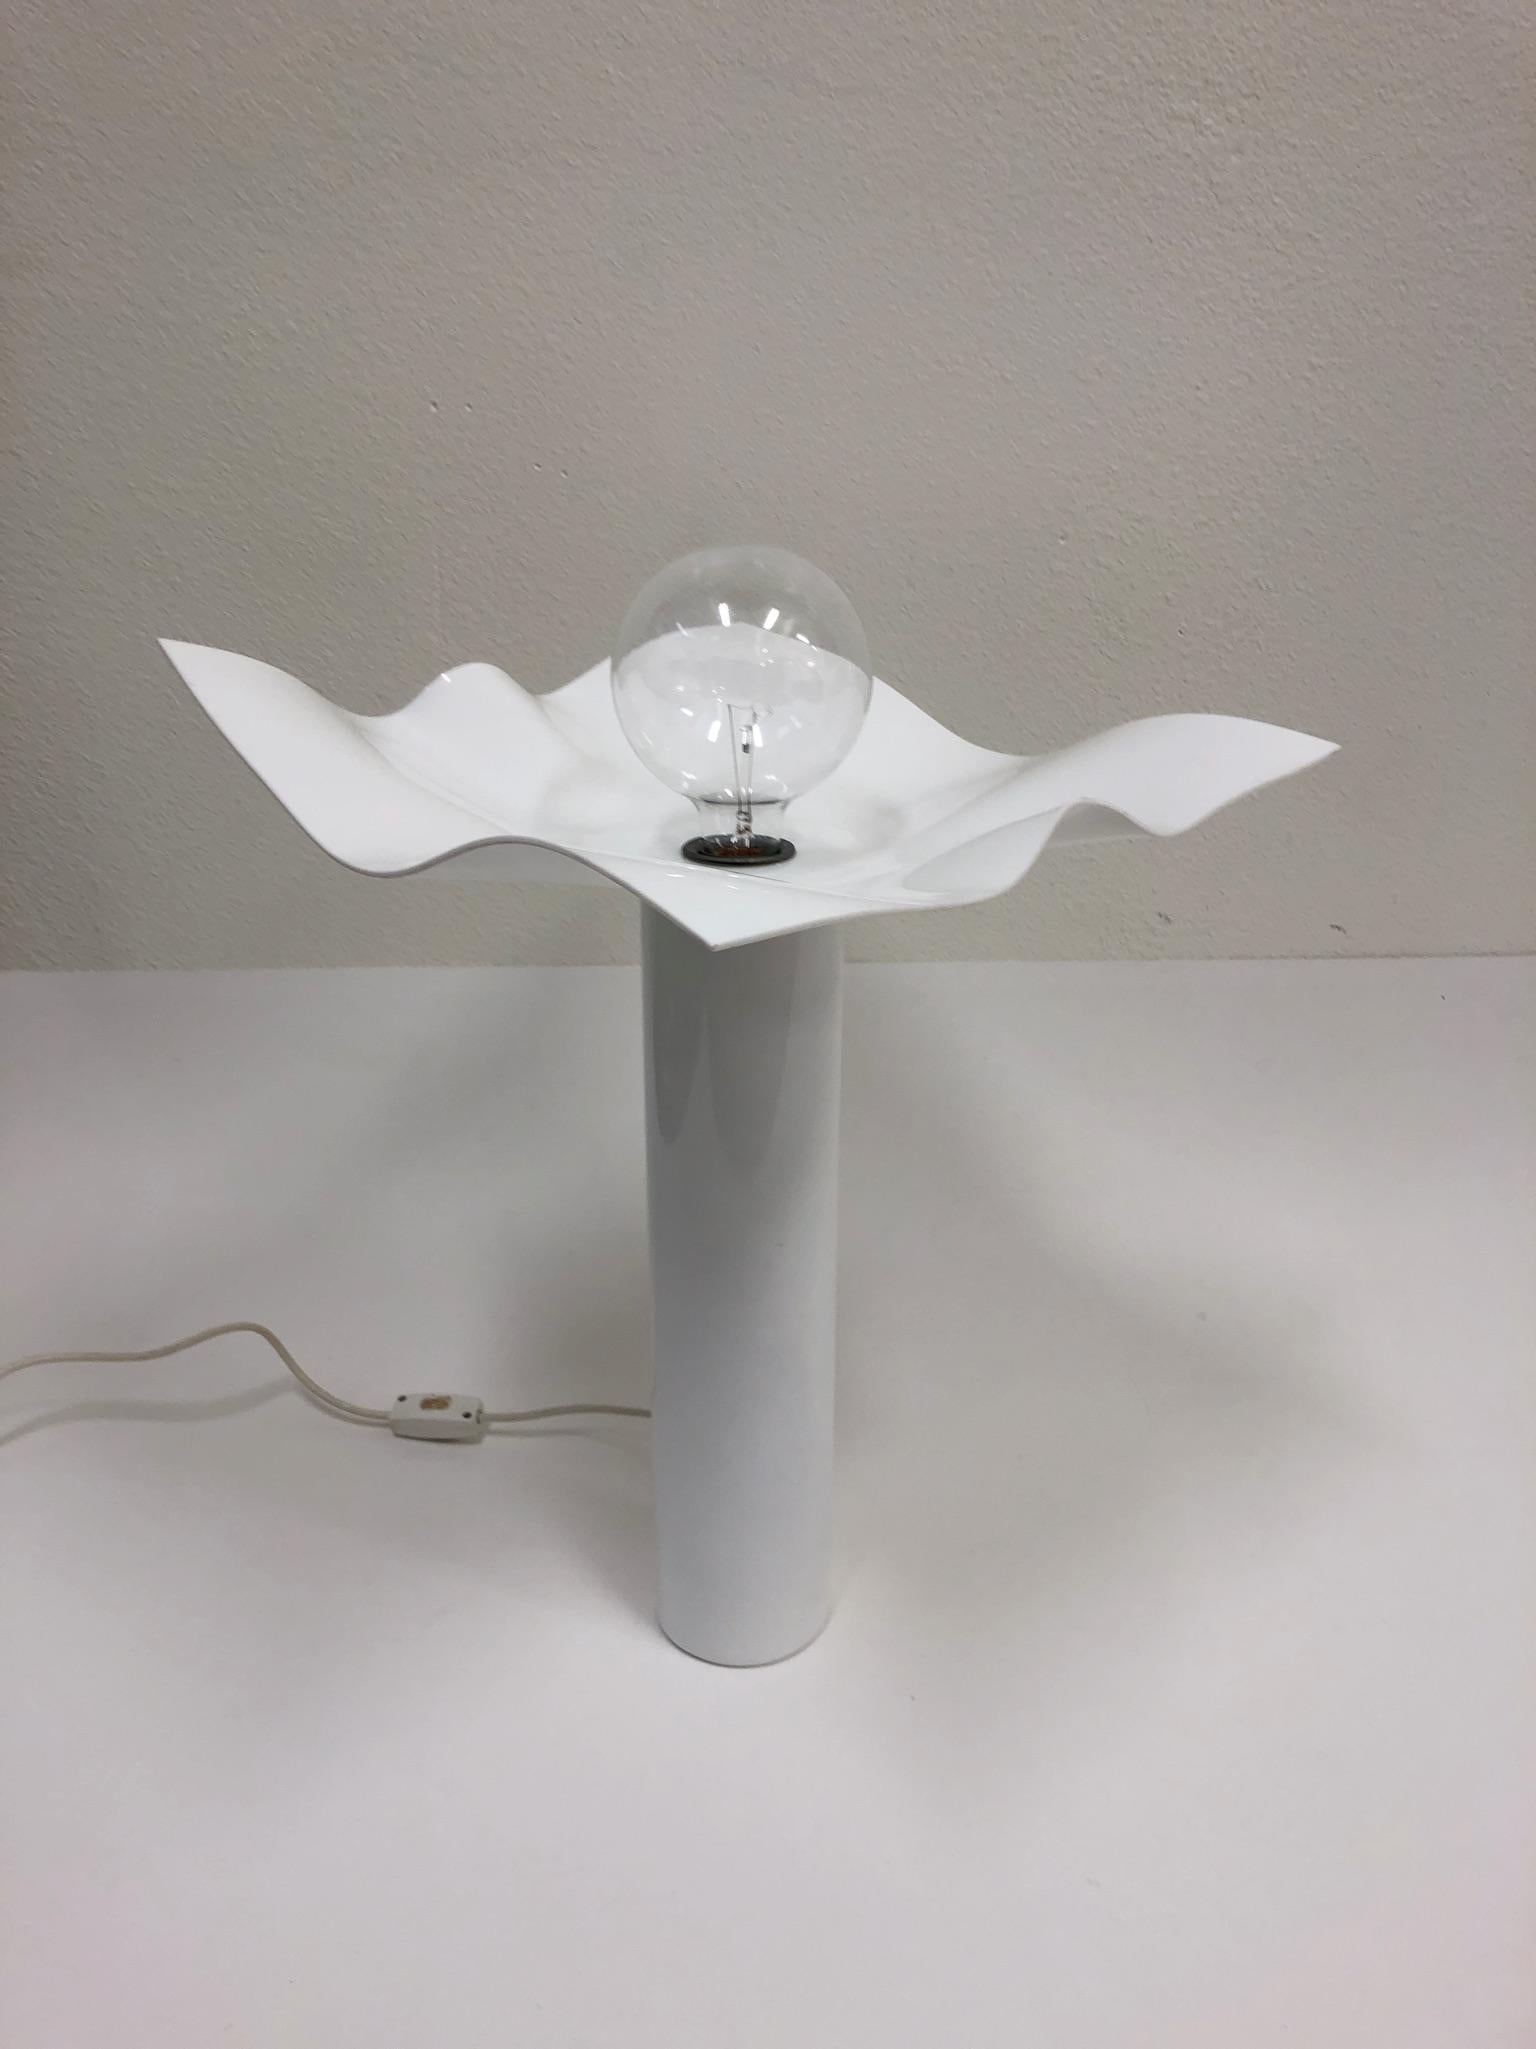 A beautiful Italian handkerchief table lamp from the 1960s. 
The lamp is constructed of white acrylic with a white powder coated steel base. Newly rewired. 

Dimensions: 23.5” high, 16” wide, 16” deep.